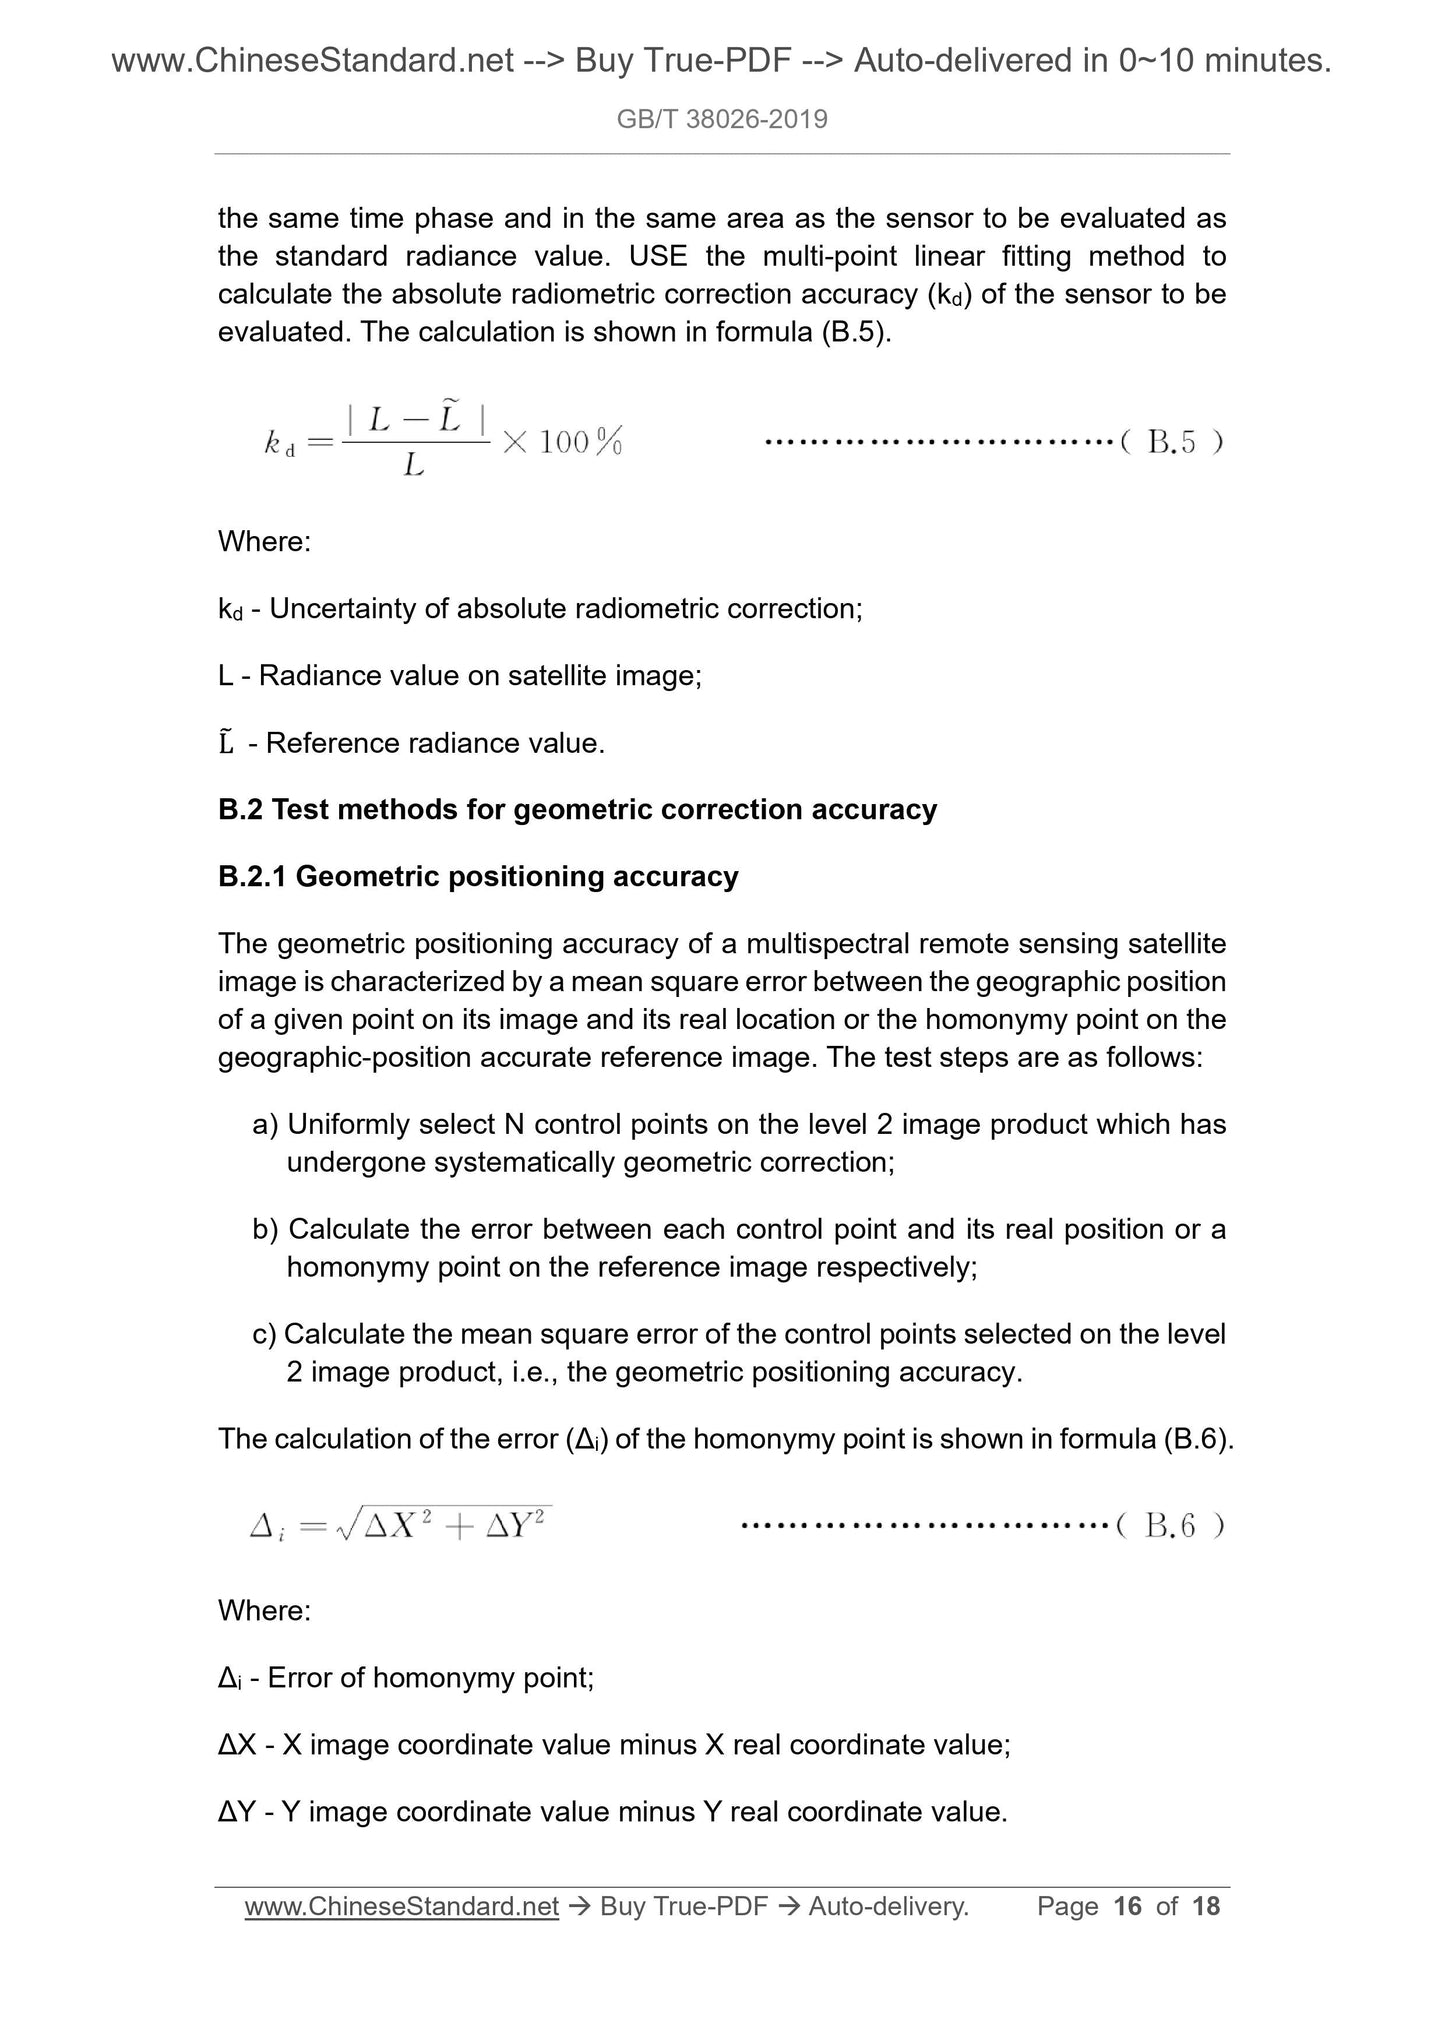 GB/T 38026-2019 Page 8